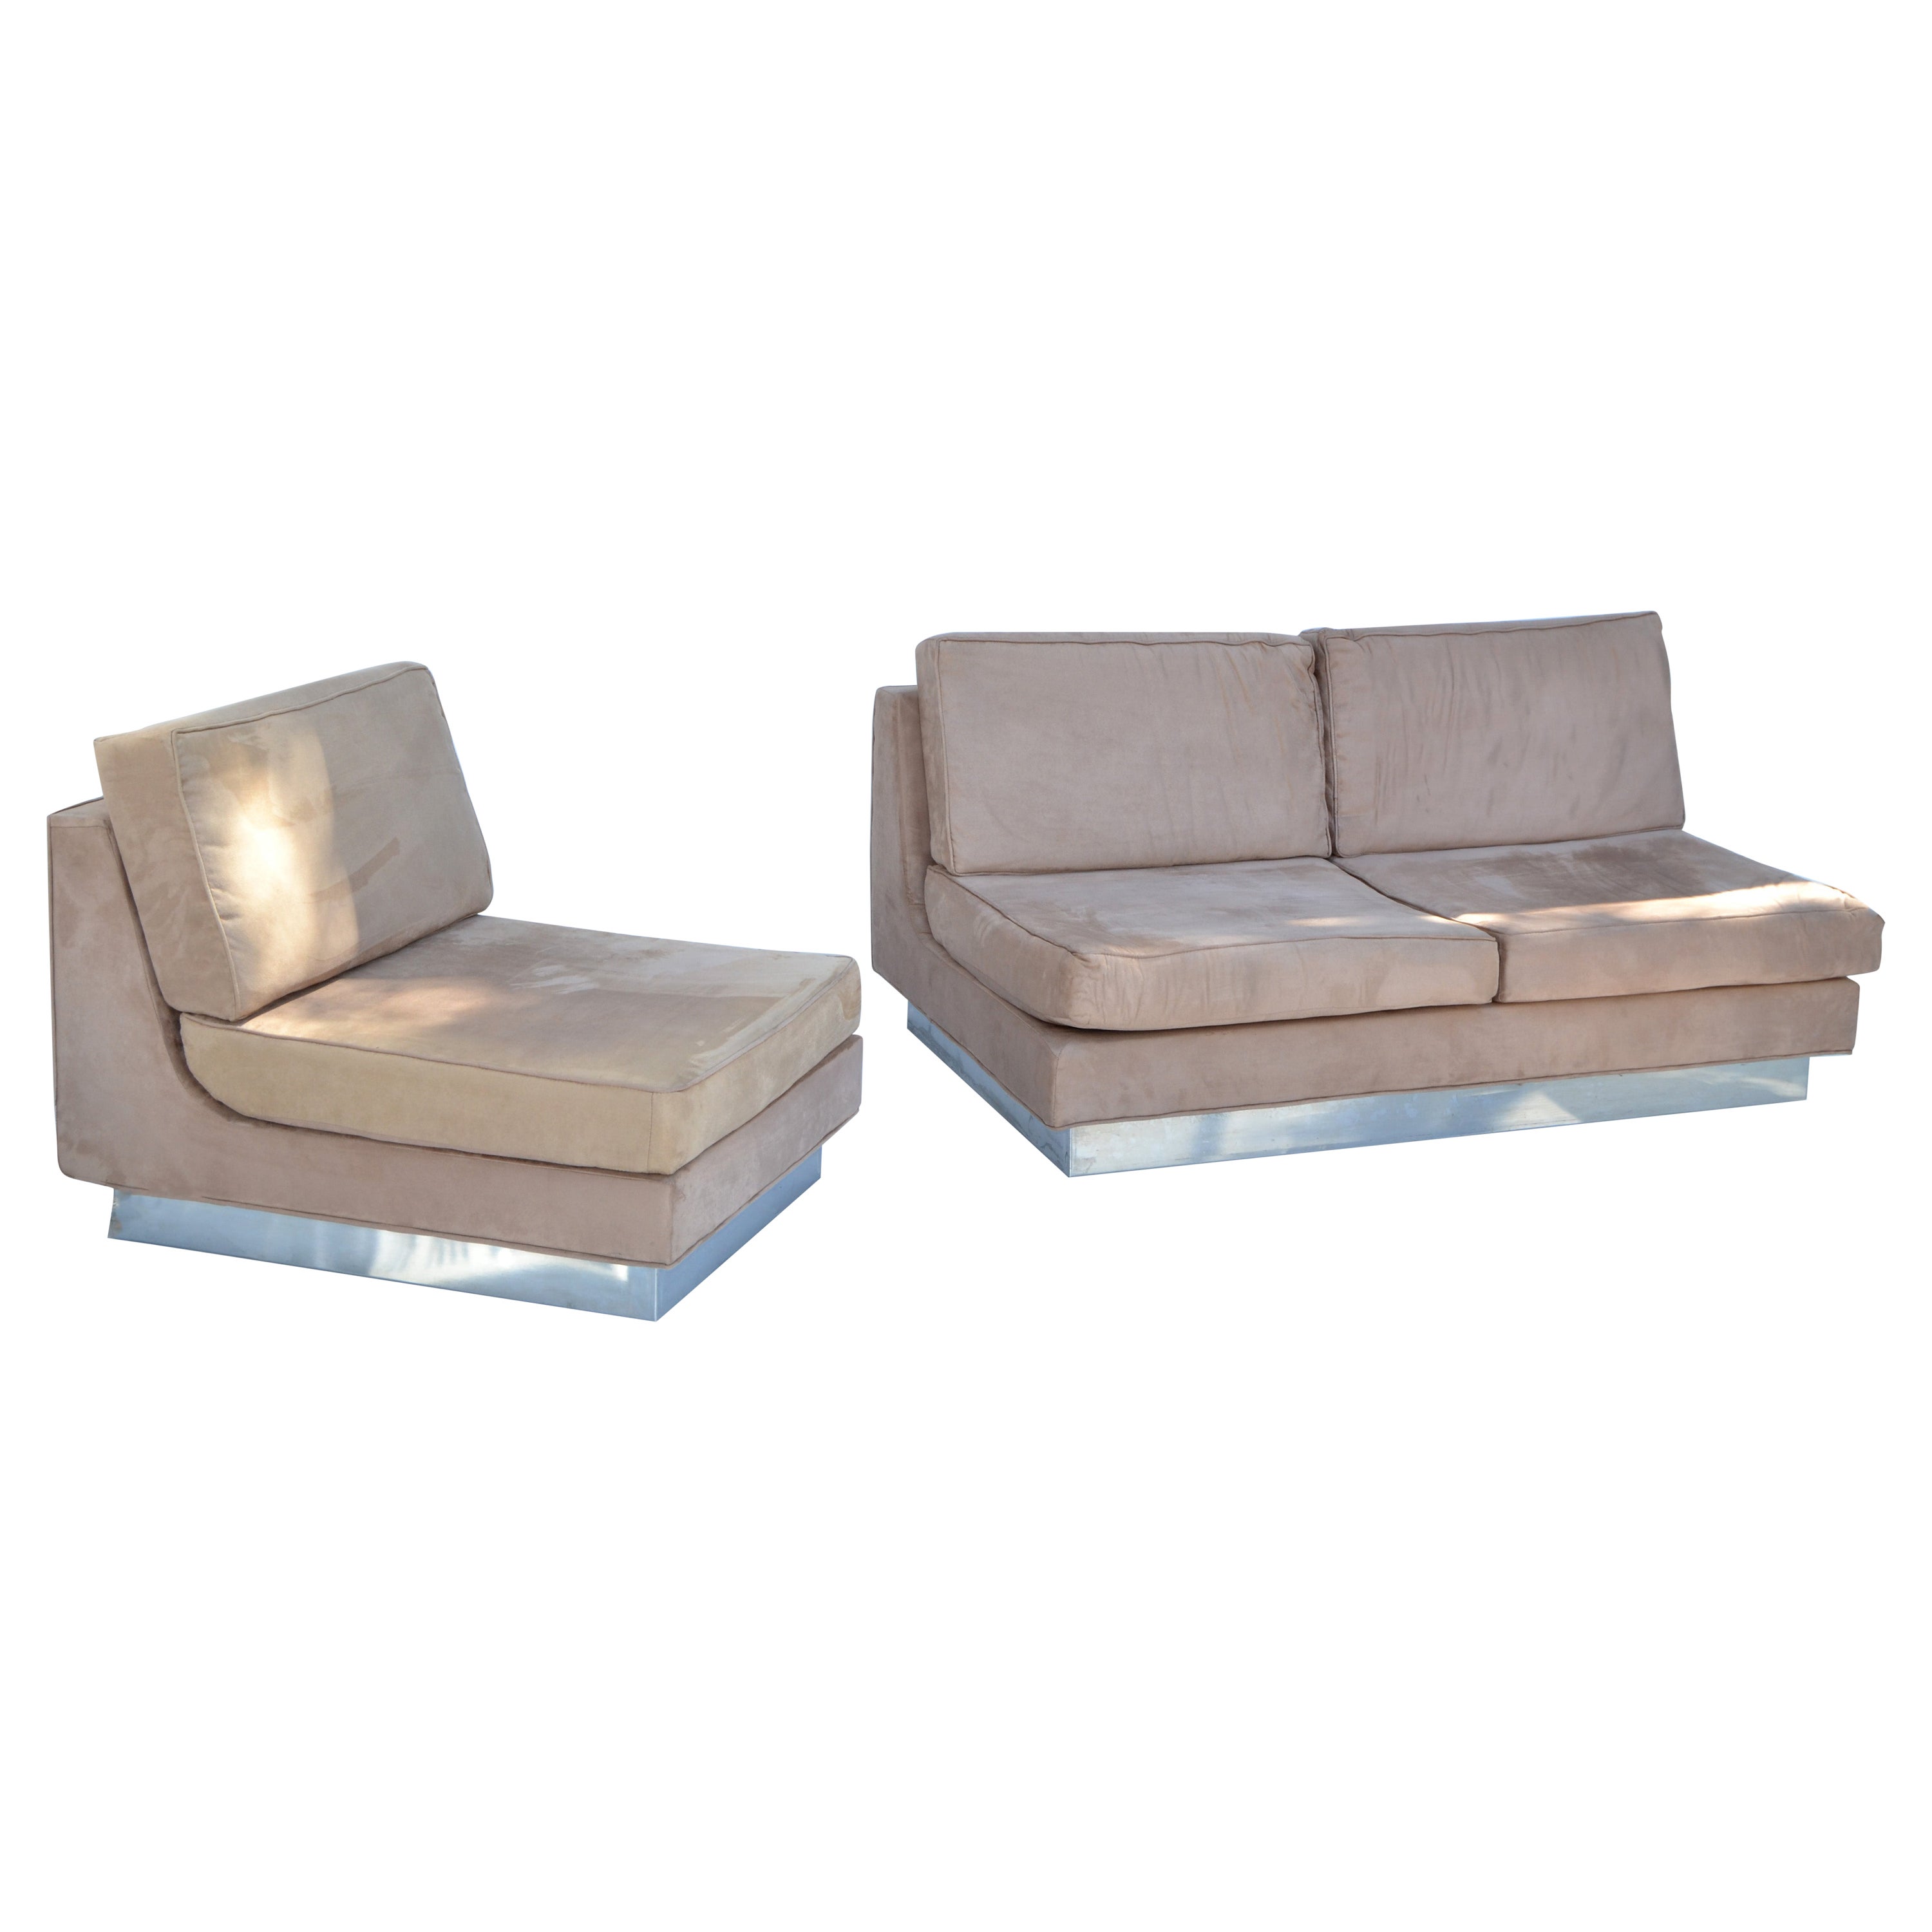 Jacques Charpentier Loveseat & Lounge Chair in Beige Ultrasuede 1970 France For Sale